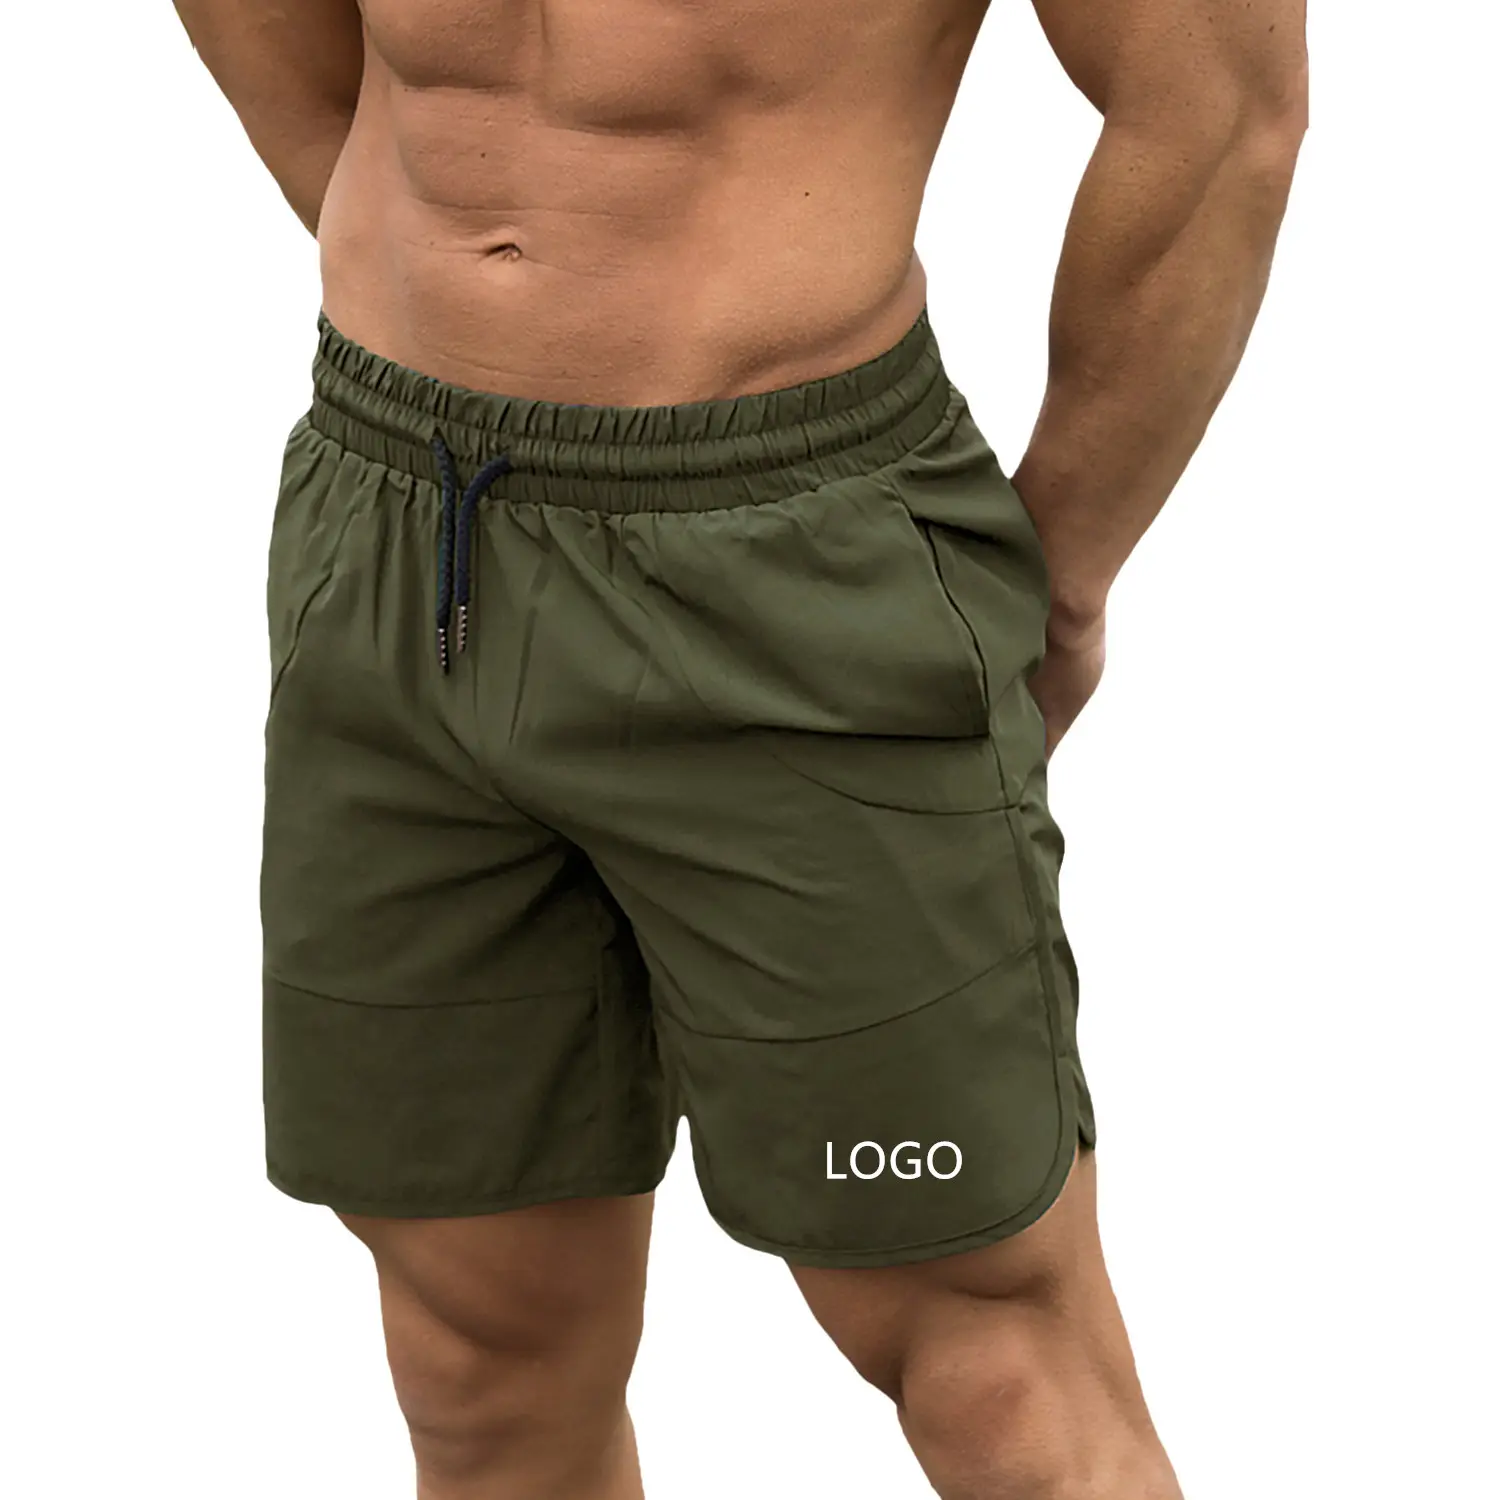 Wholesales 7'' Inch Spandex Workout Shorts Mesh Fitness Mens Gym Shorts With Pocket